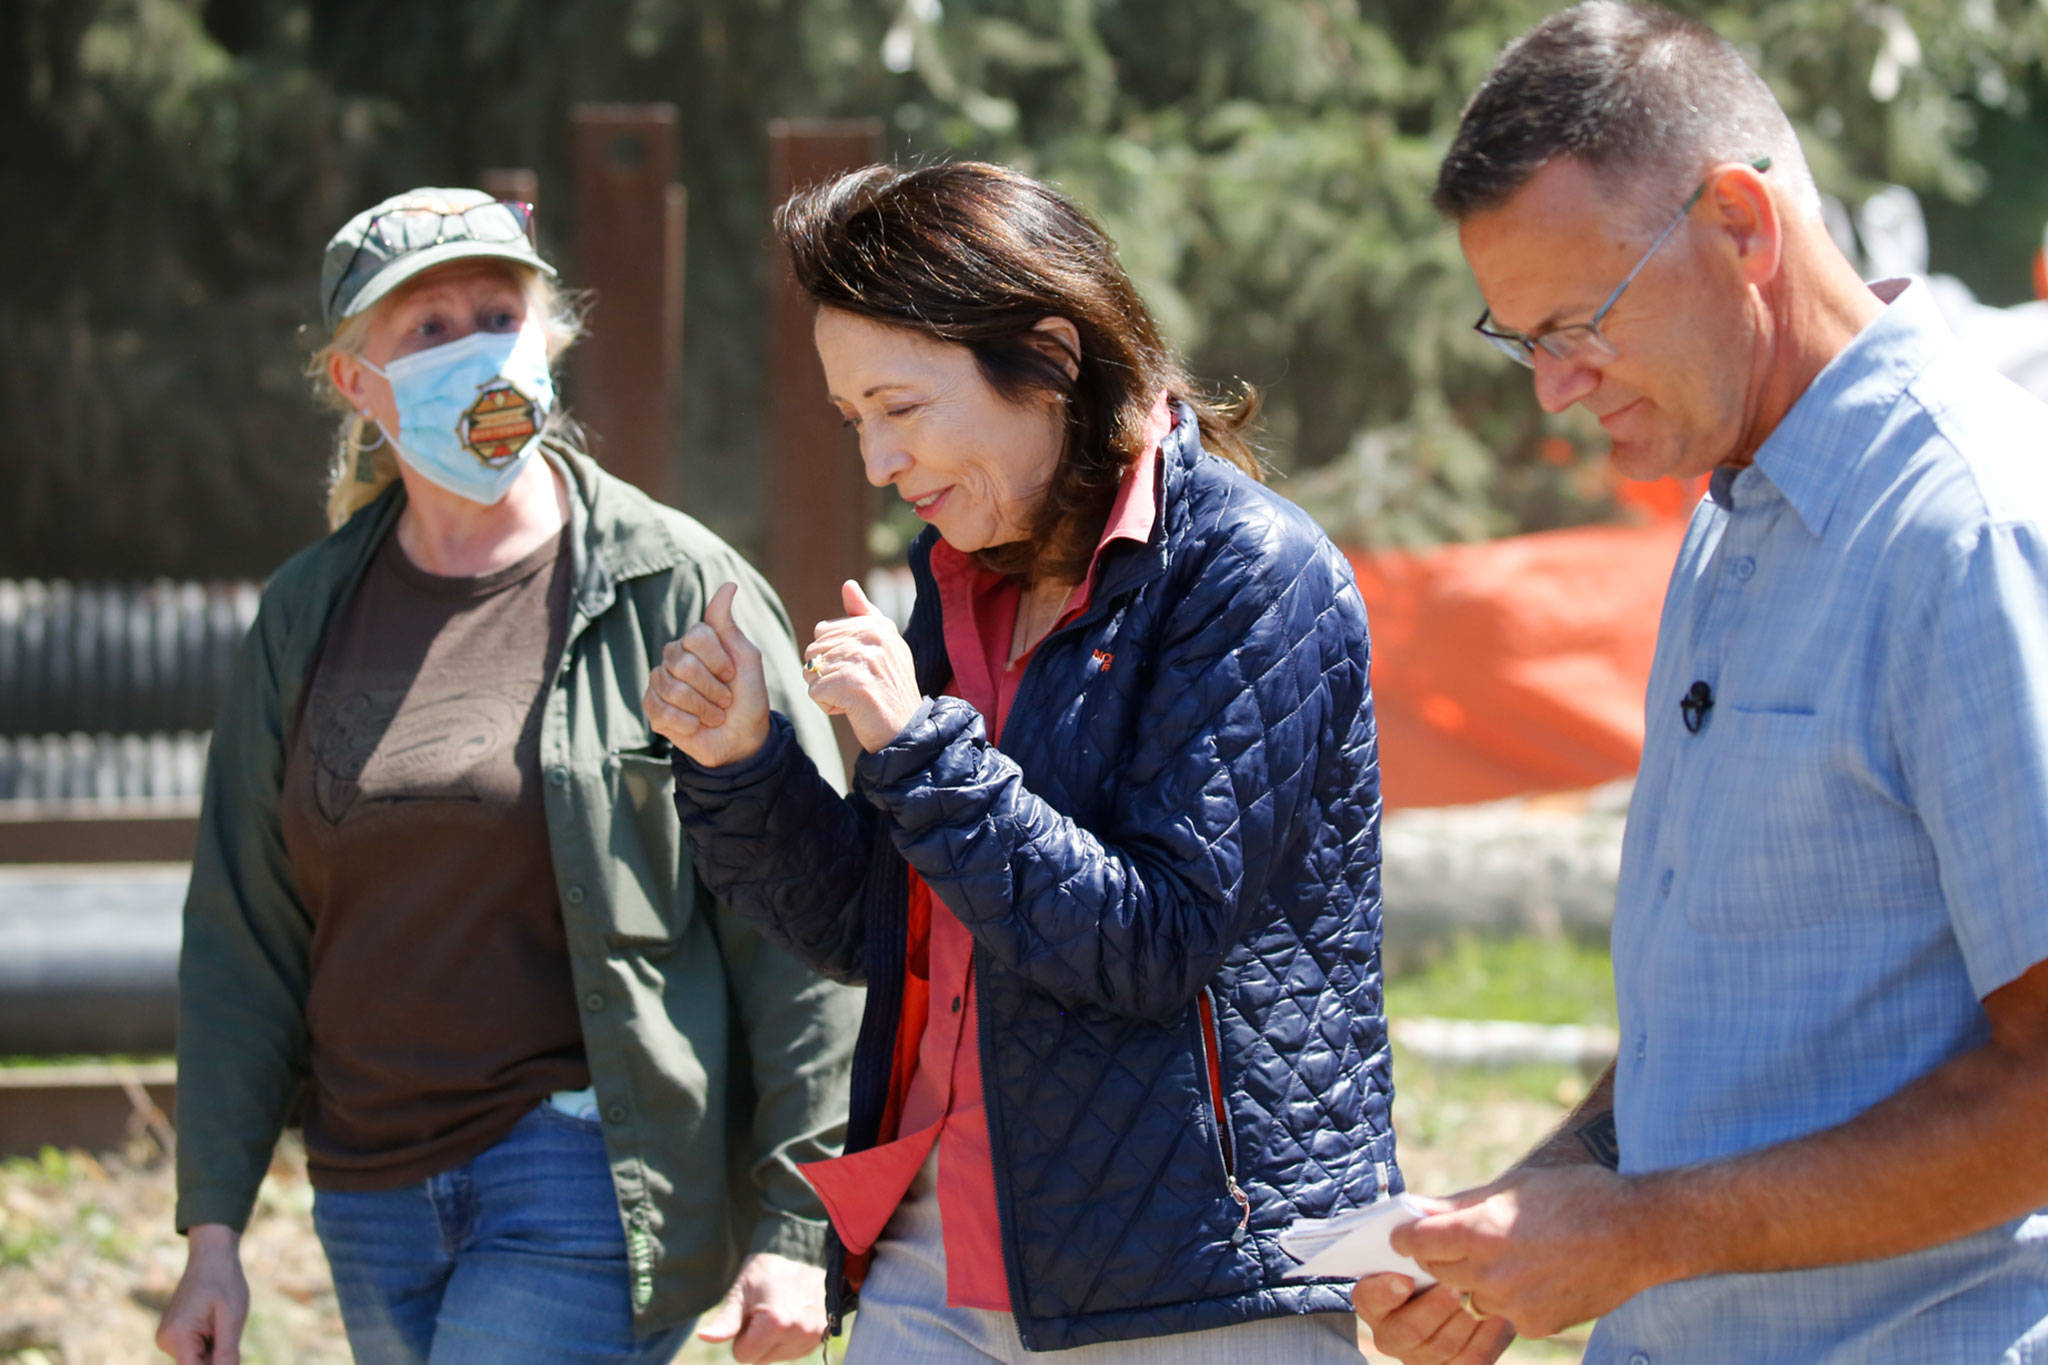 From left, Logan Daniels, Snohomish County Parks and Recreation lead engineer, U.S. Sen. Maria Cantwell and Tom Teigen, Snohomish County Conservation and Natural Resources director, tour the estuary restoration project Friday at Meadowdale Beach Park in Edmonds. (Kevin Clark / The Herald)